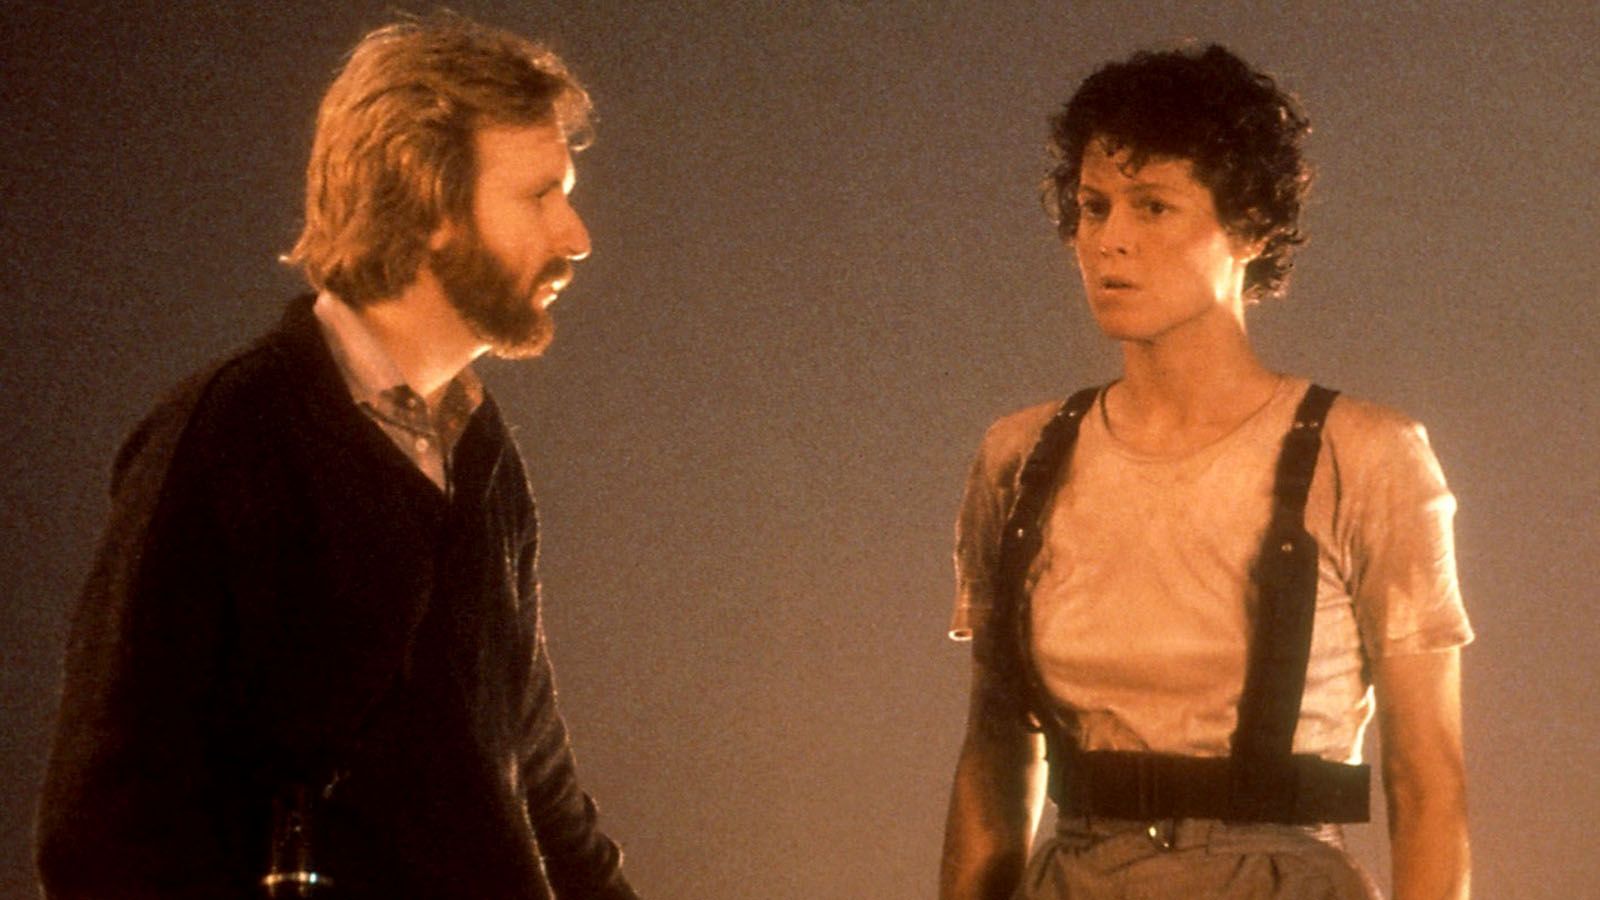 James Cameron works with Sigourney Weaver on the set of "Aliens."